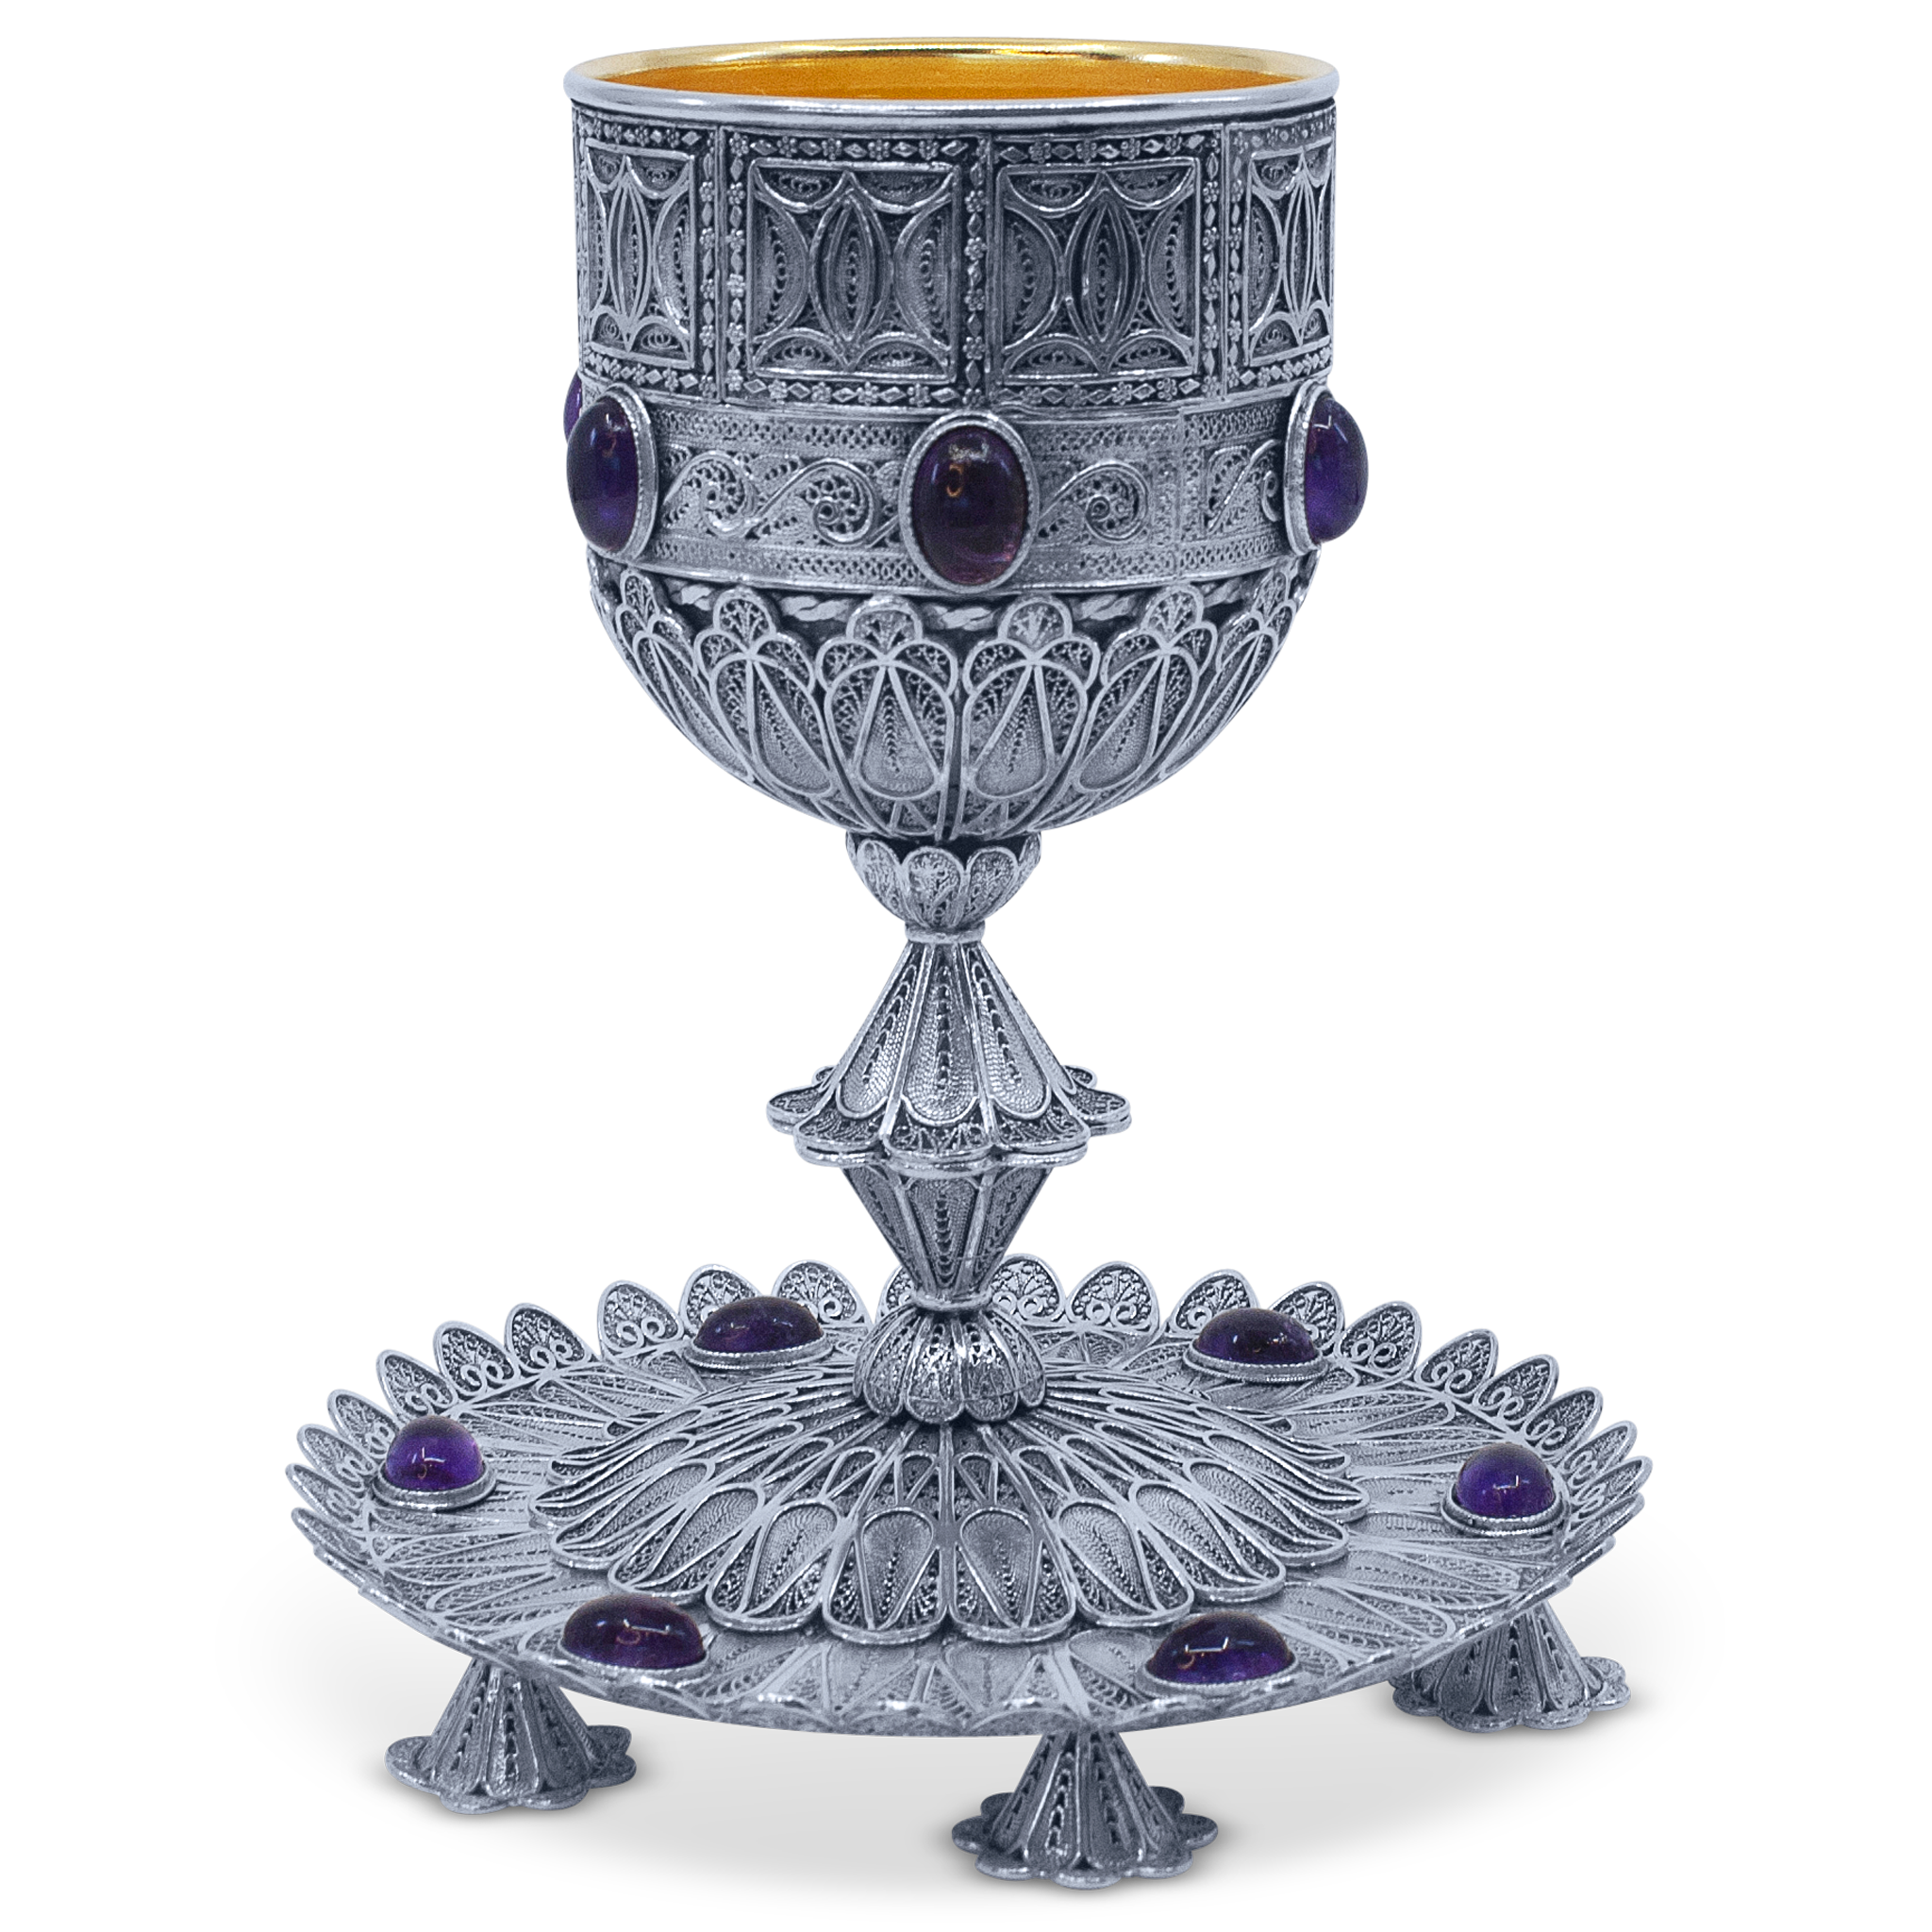 Filigree Cup with Amethyst Accents